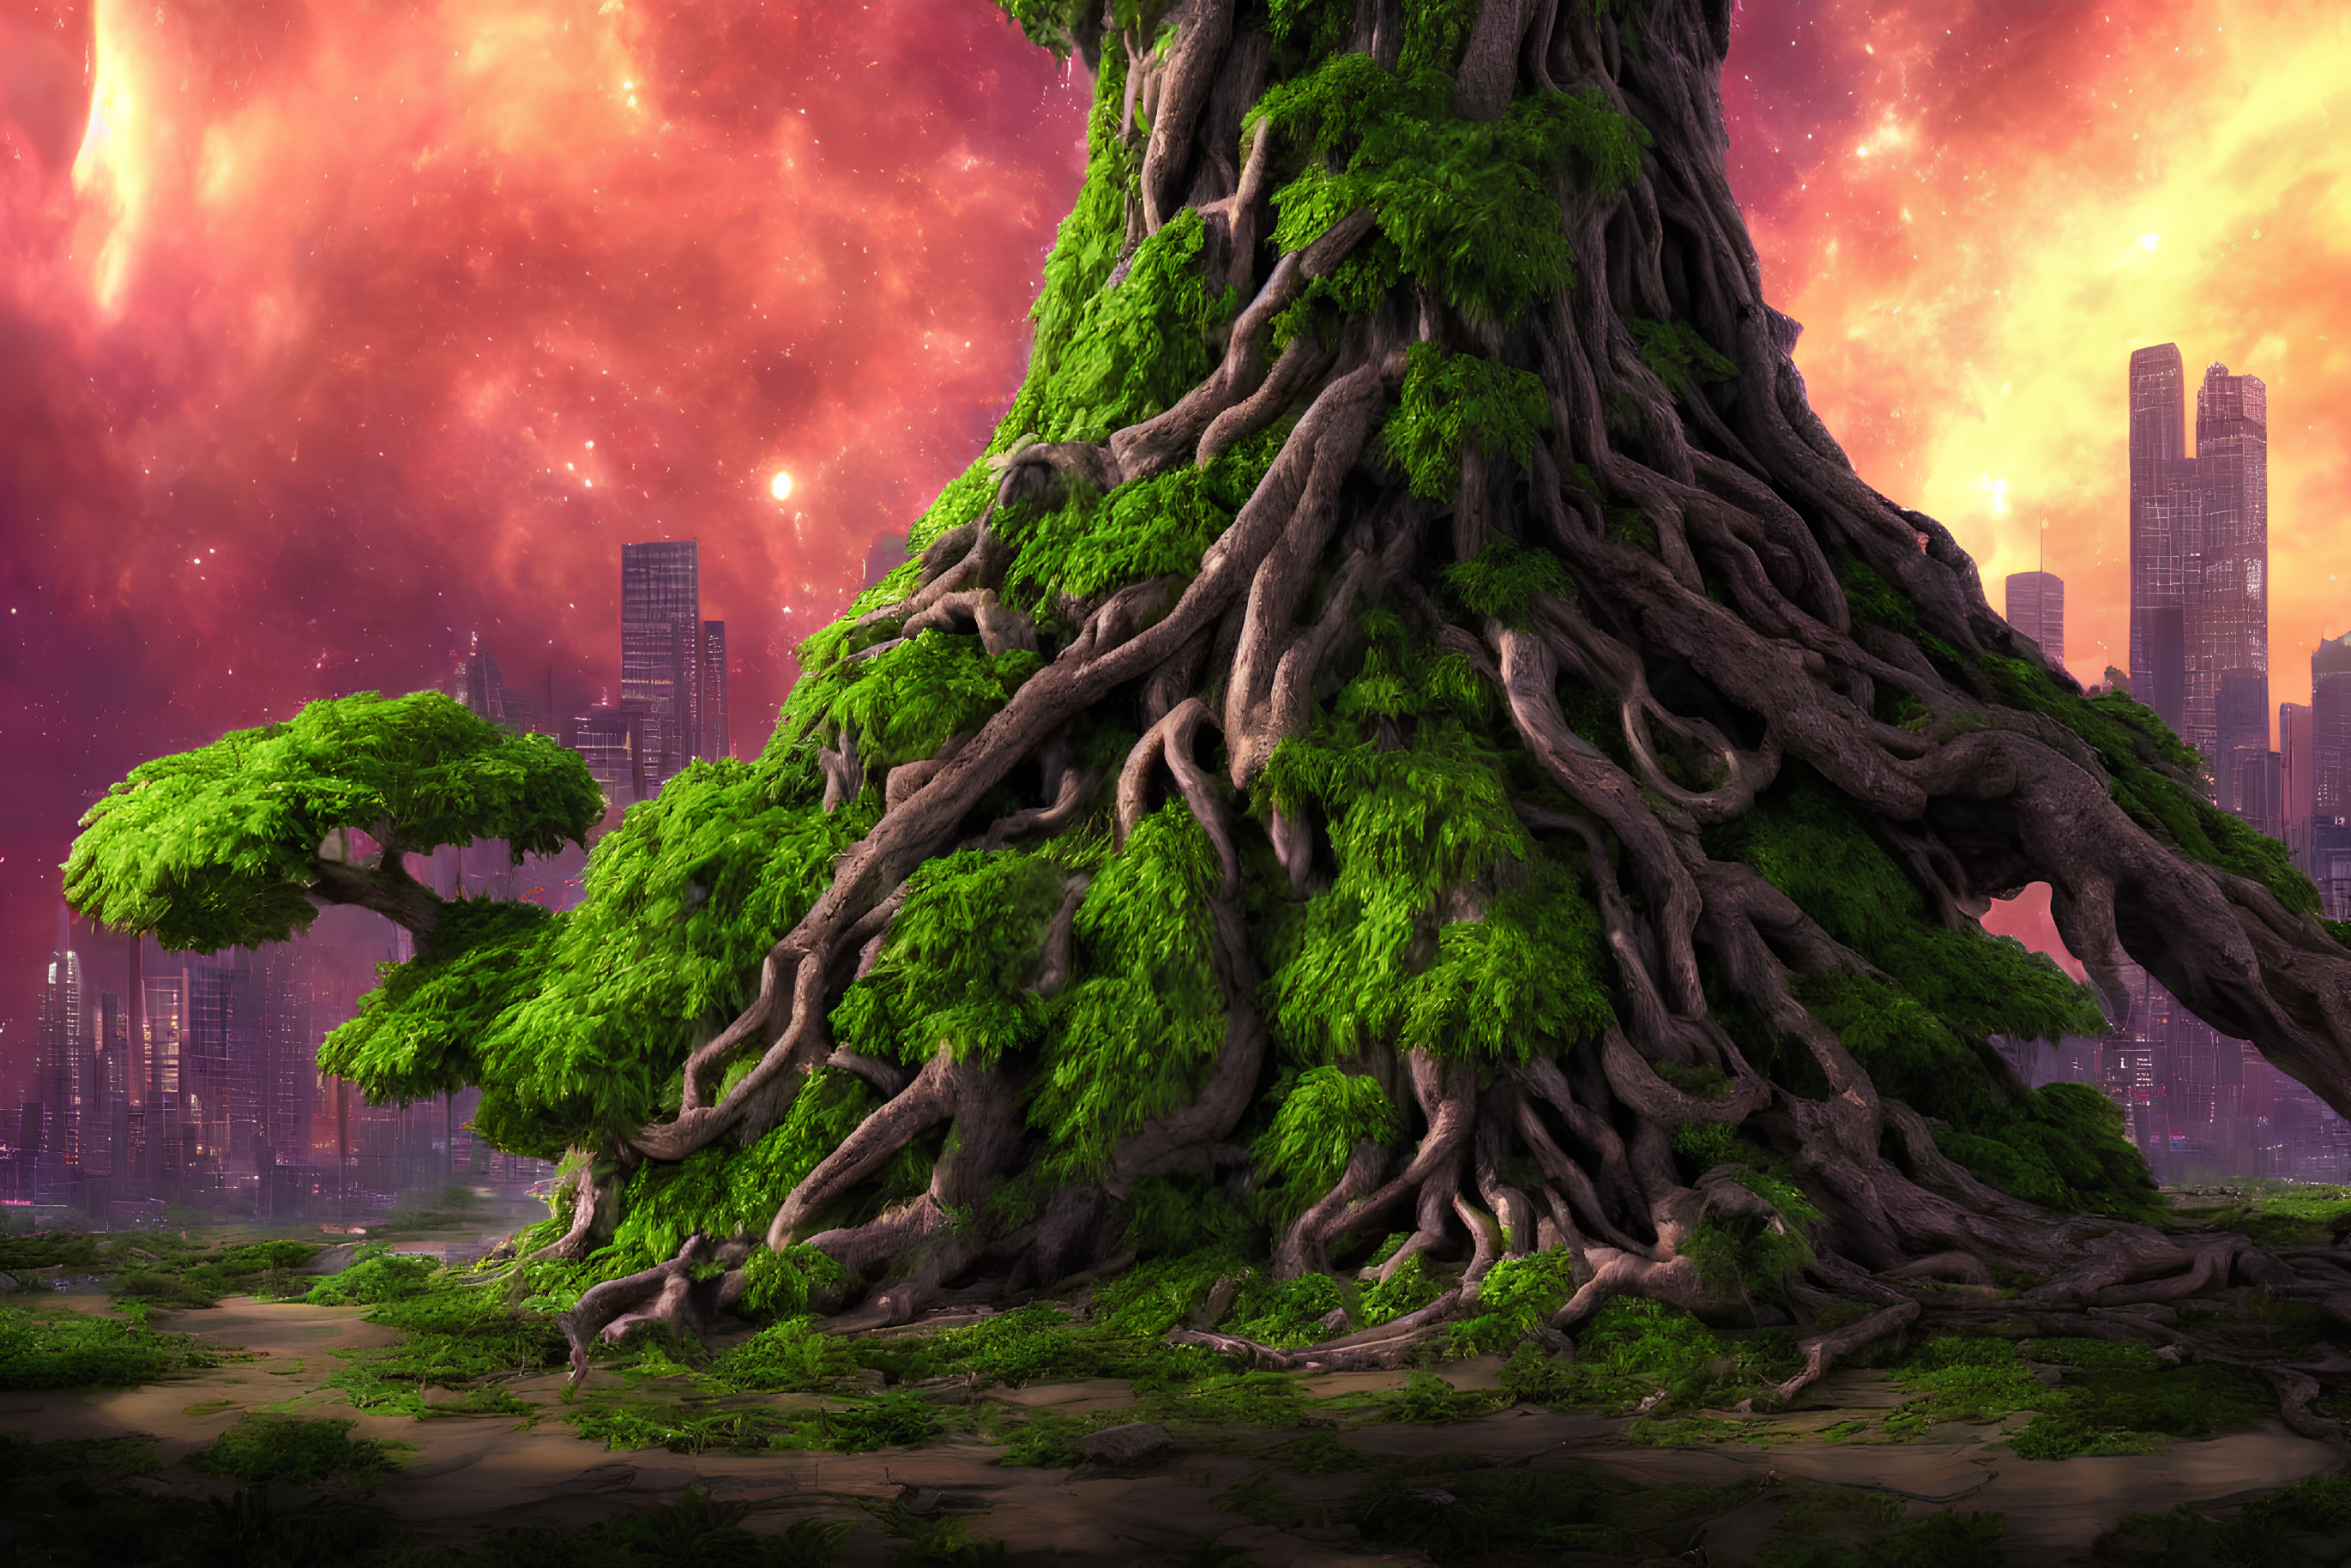 Colossal ancient tree in fantastical cityscape under vibrant red nebula sky